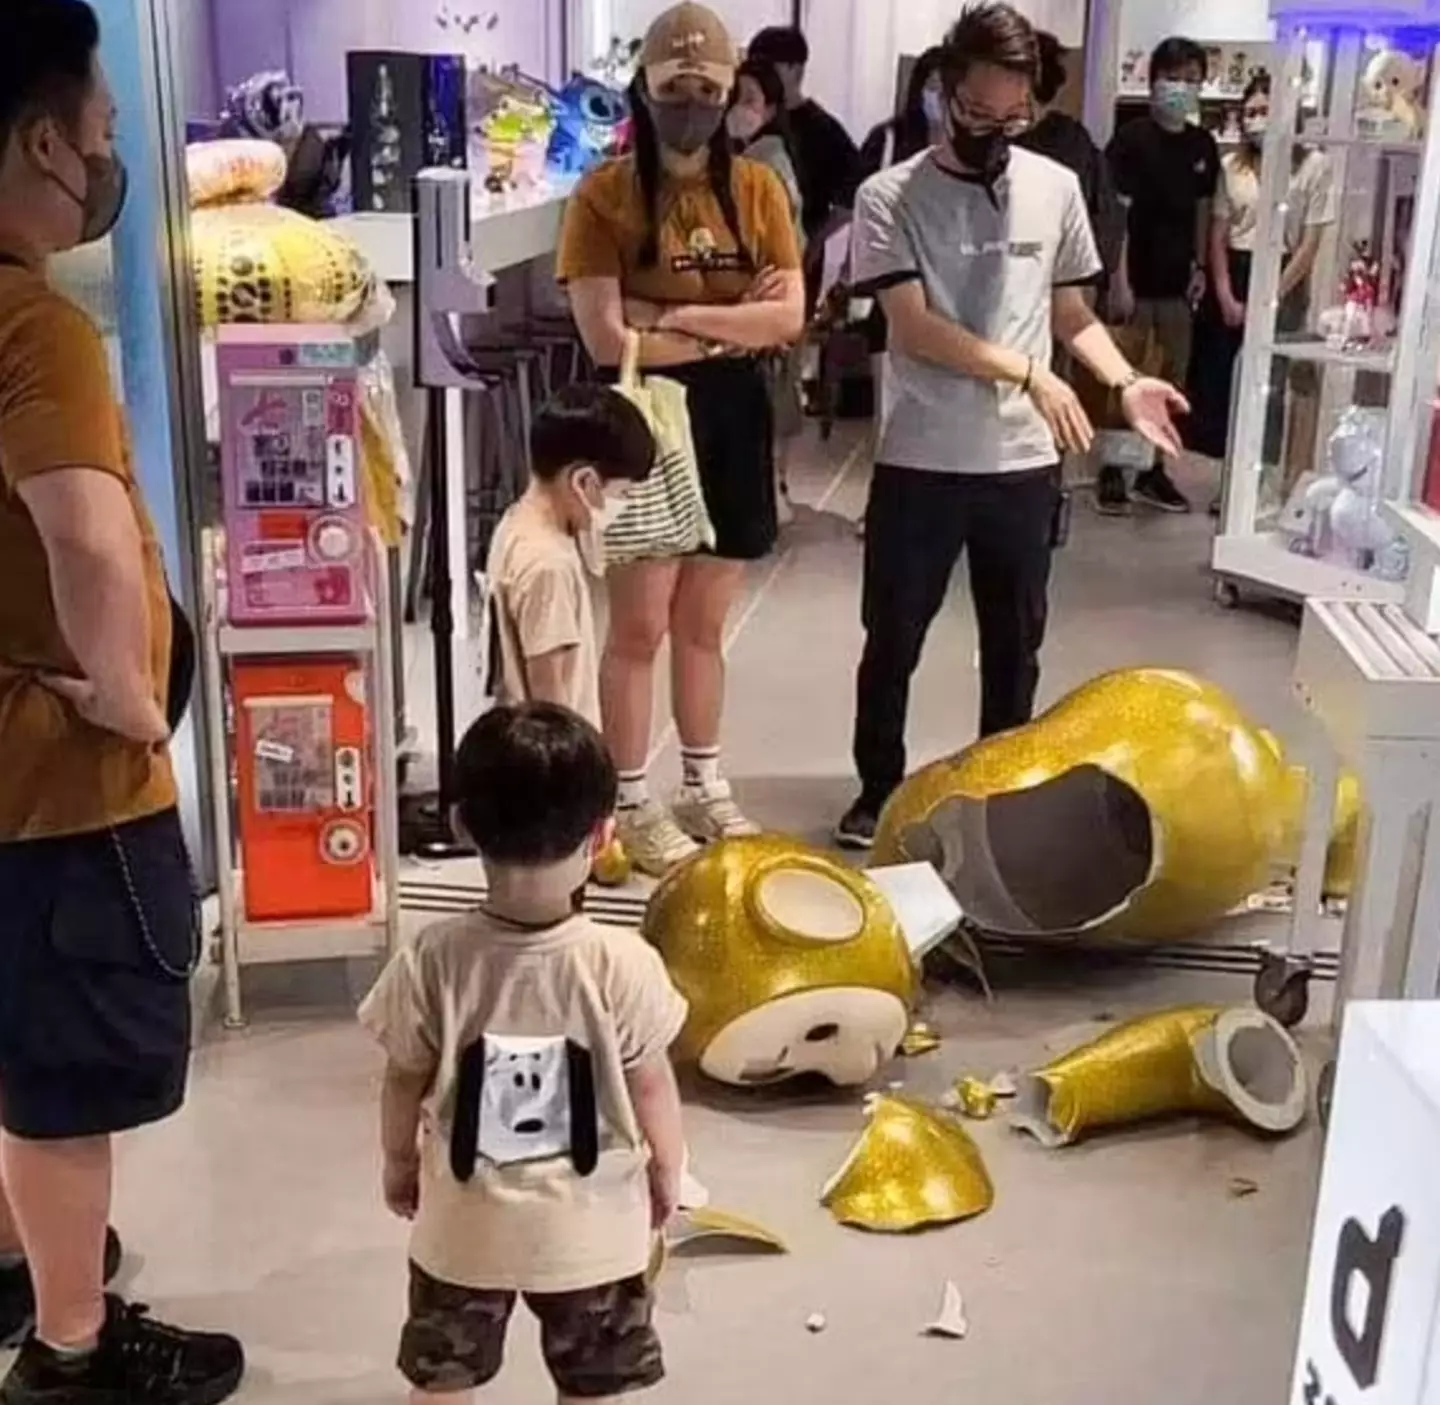 A toy shop in Hong Kong has apologised to the family after claiming their son knocked over a Teletubbies sculpture.